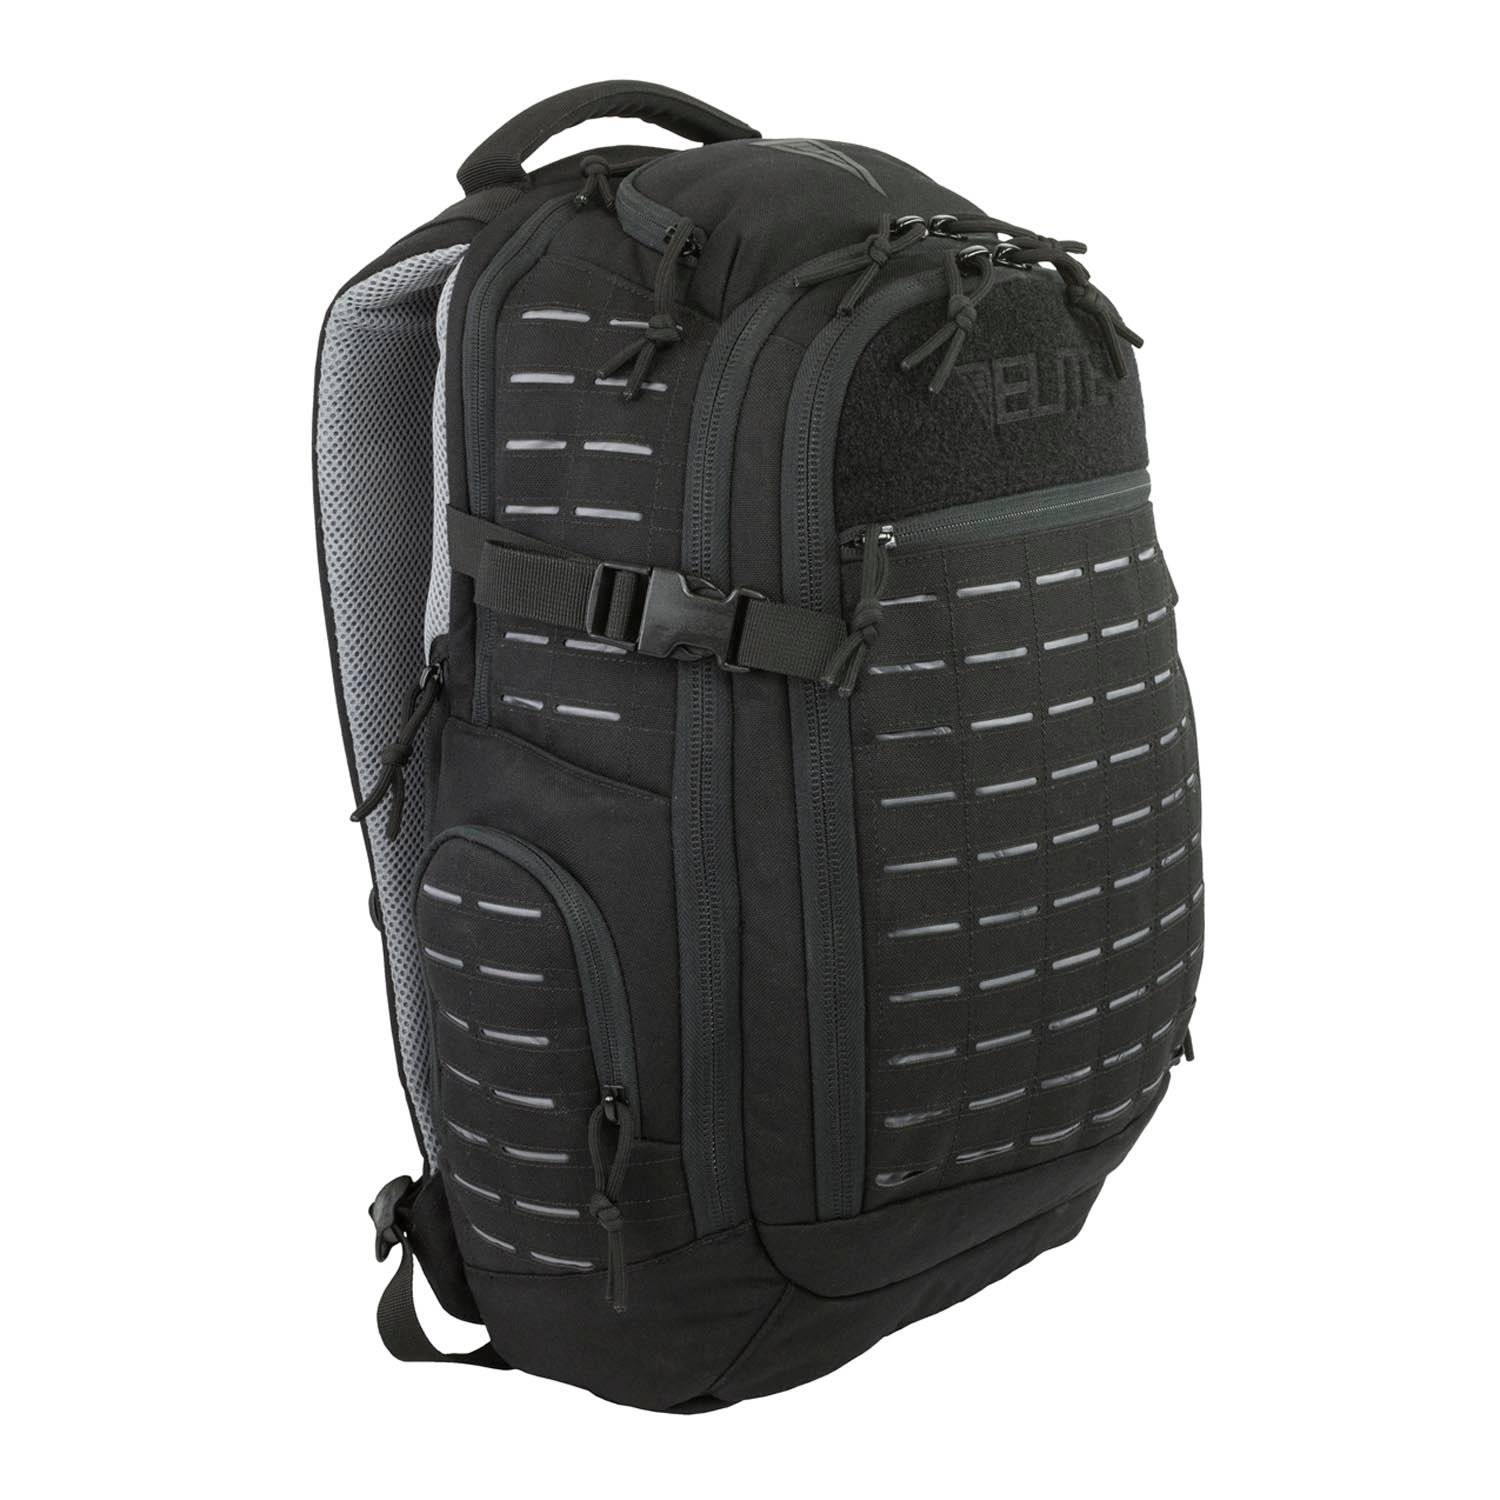 ELITE SURVIVAL SYSTEMS GUARDIAN EDC CCW BACKPACK 25L